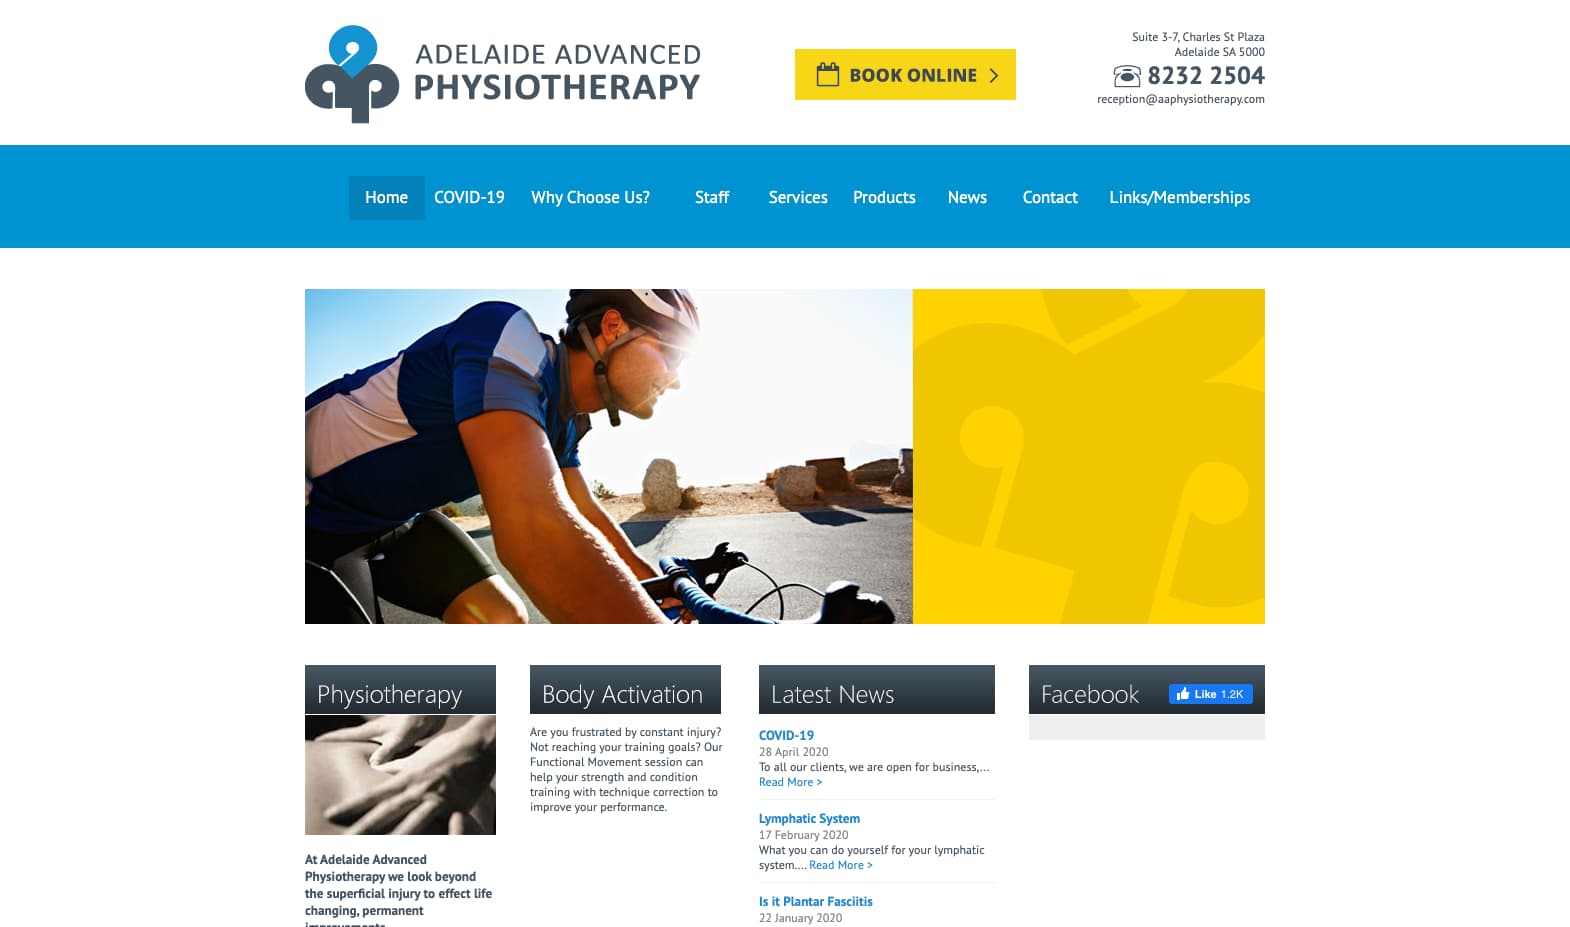 Adelaide Advanced Physiotherapy